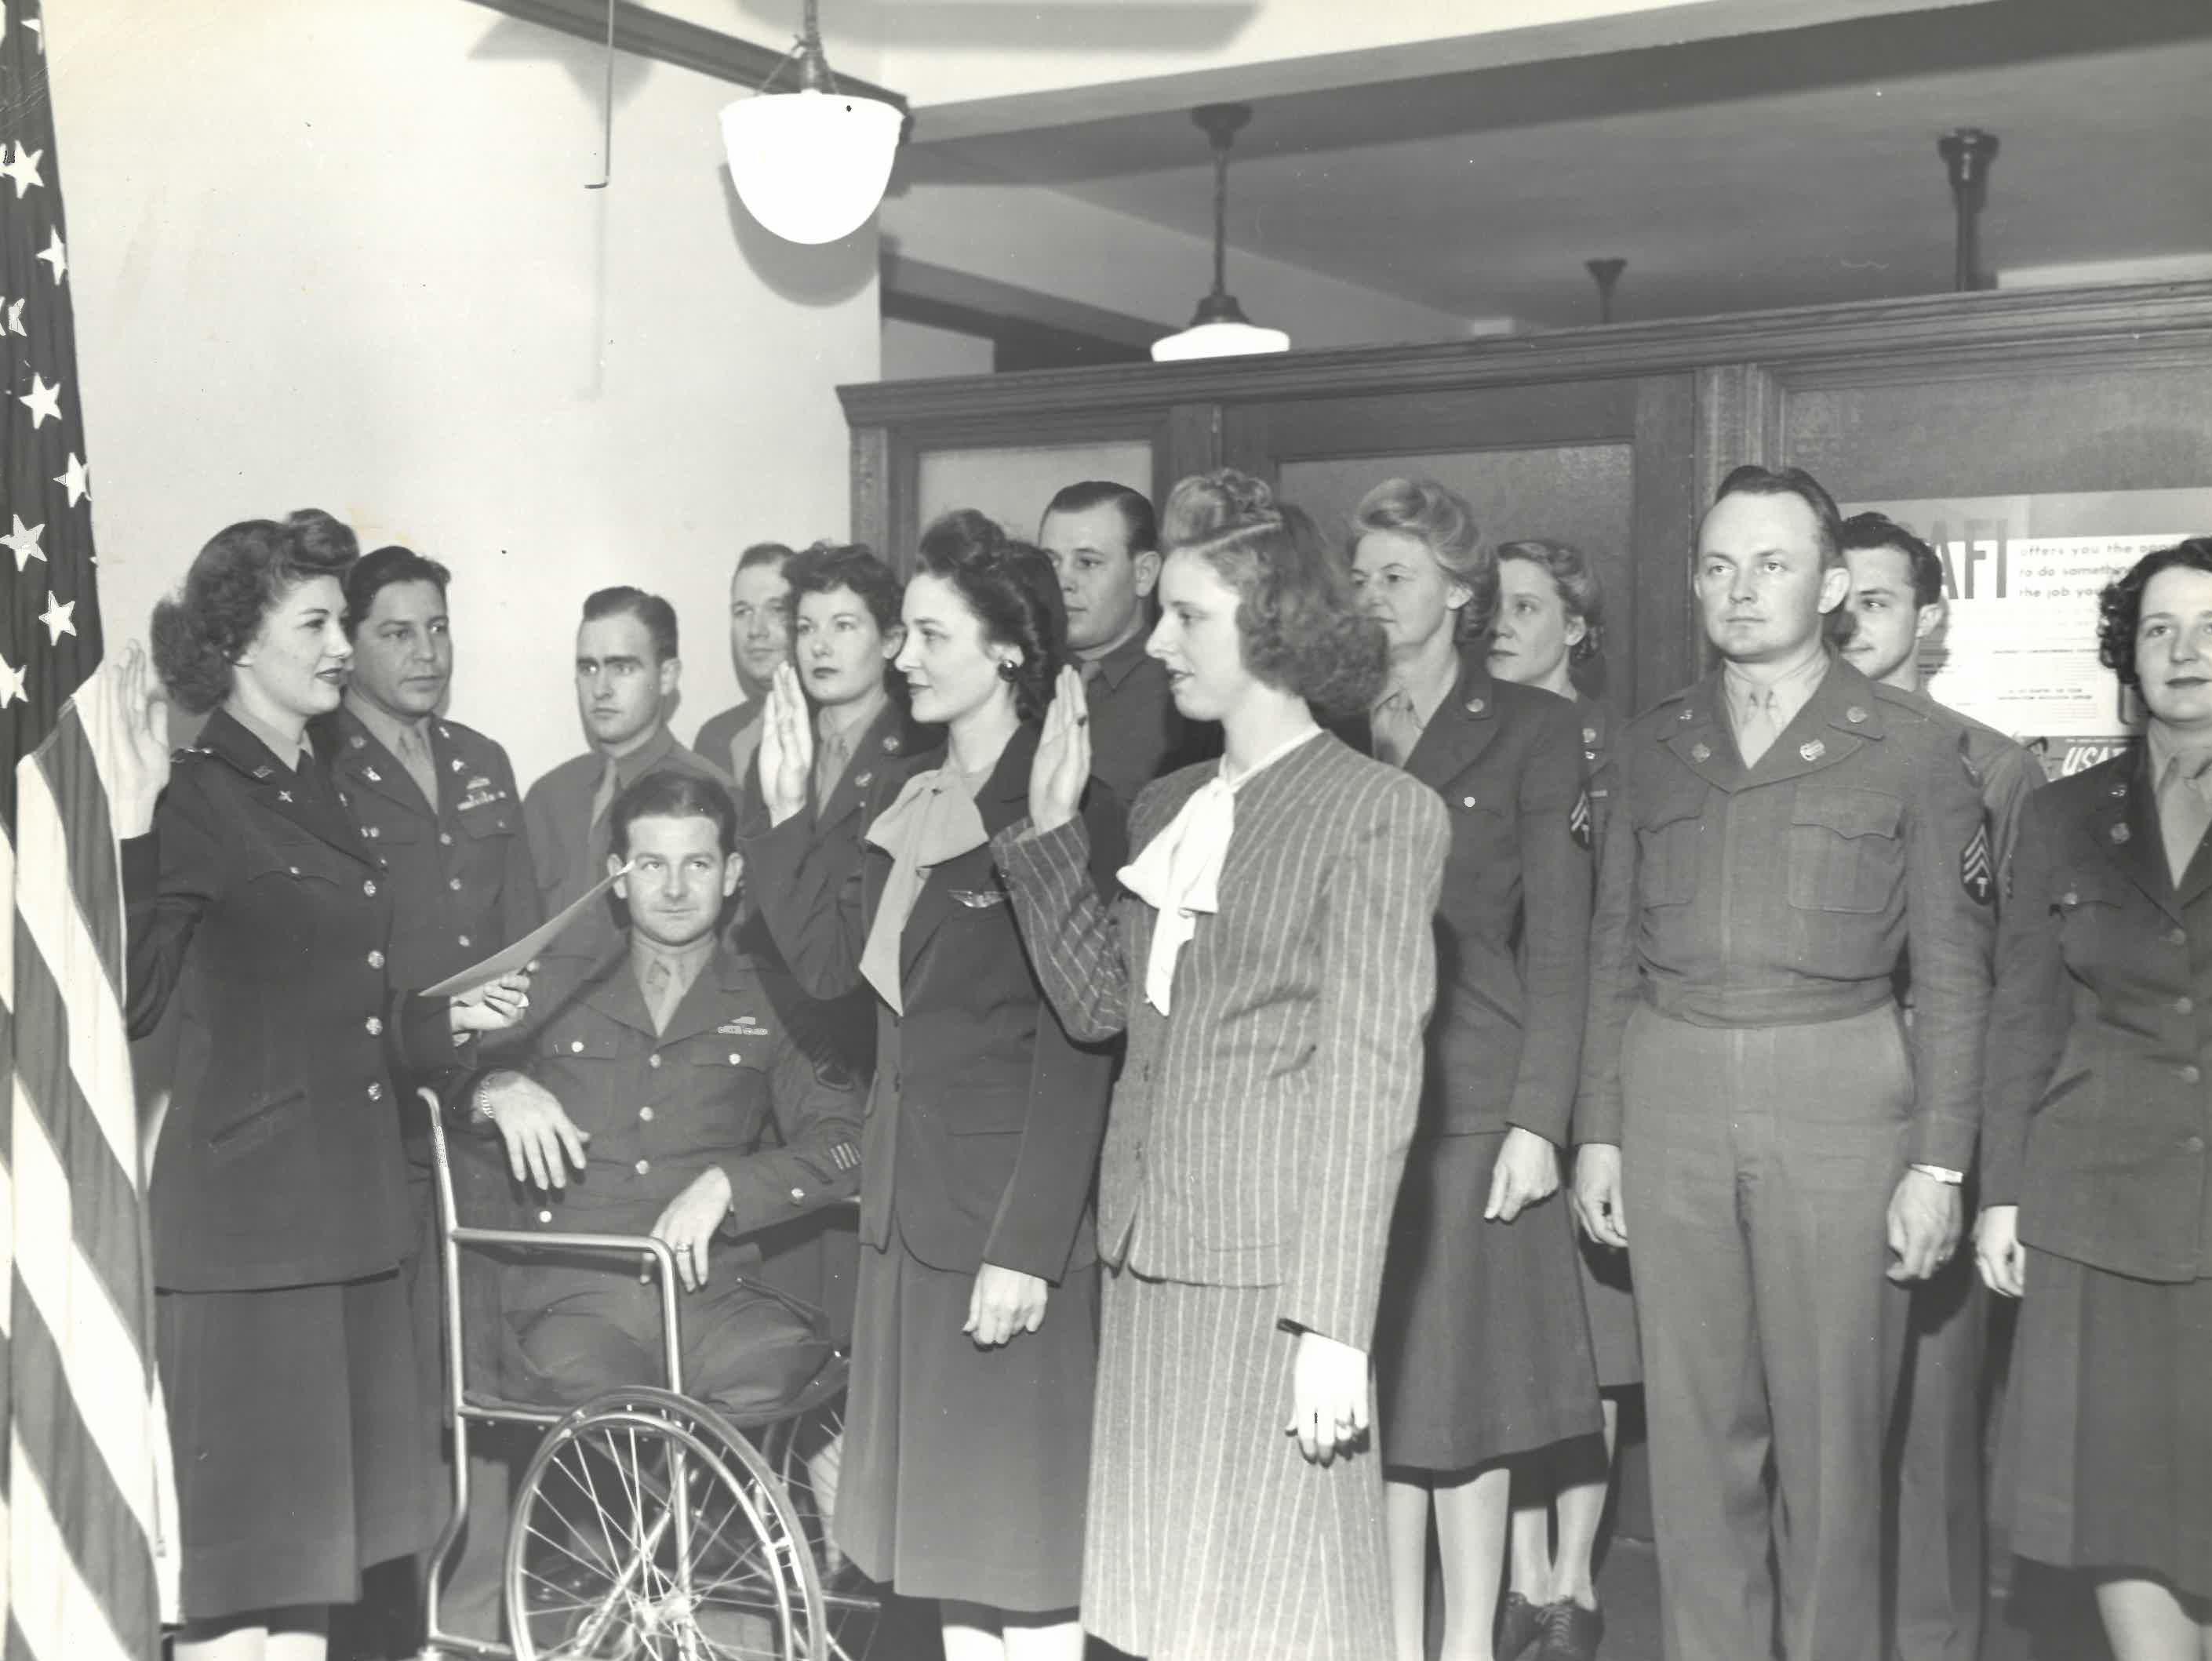 Photograph of Women's Army Corps soldiers being sworn-in at an induction ceremony